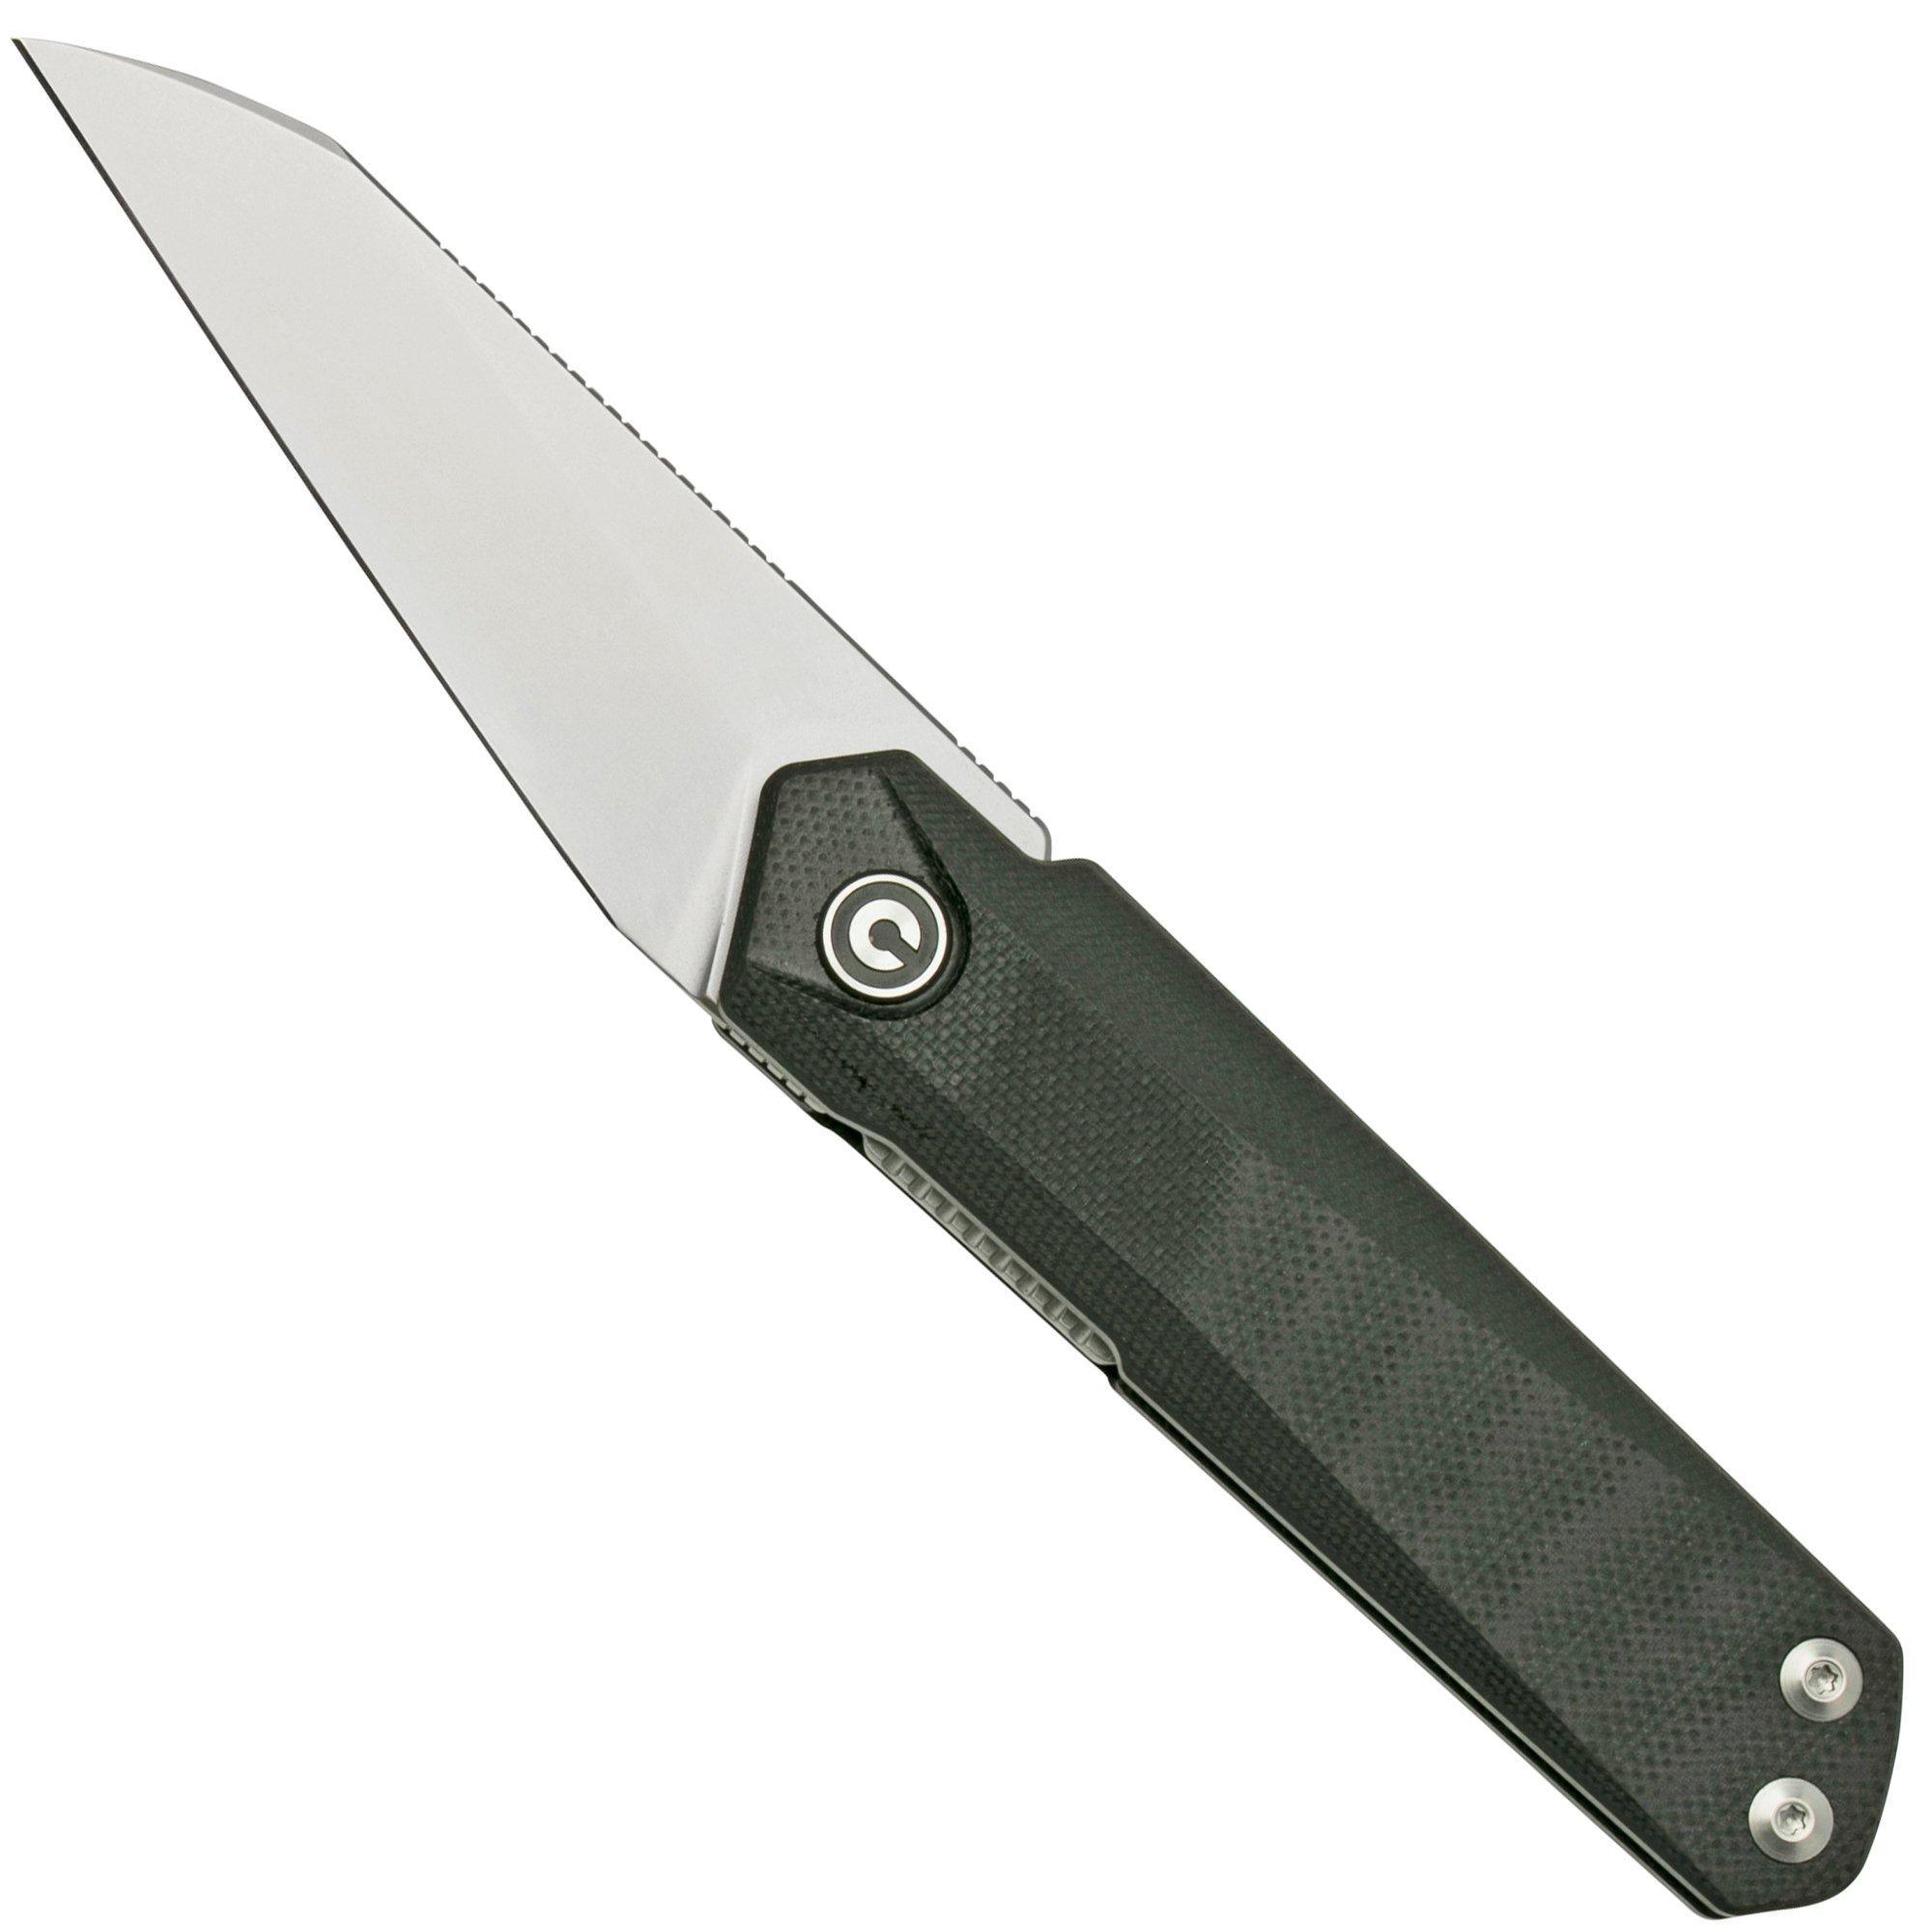 Case Copperhead Green & Black Carbon Fibre-G10 Weave Smooth, 50713, 10249W  SS pocket knife